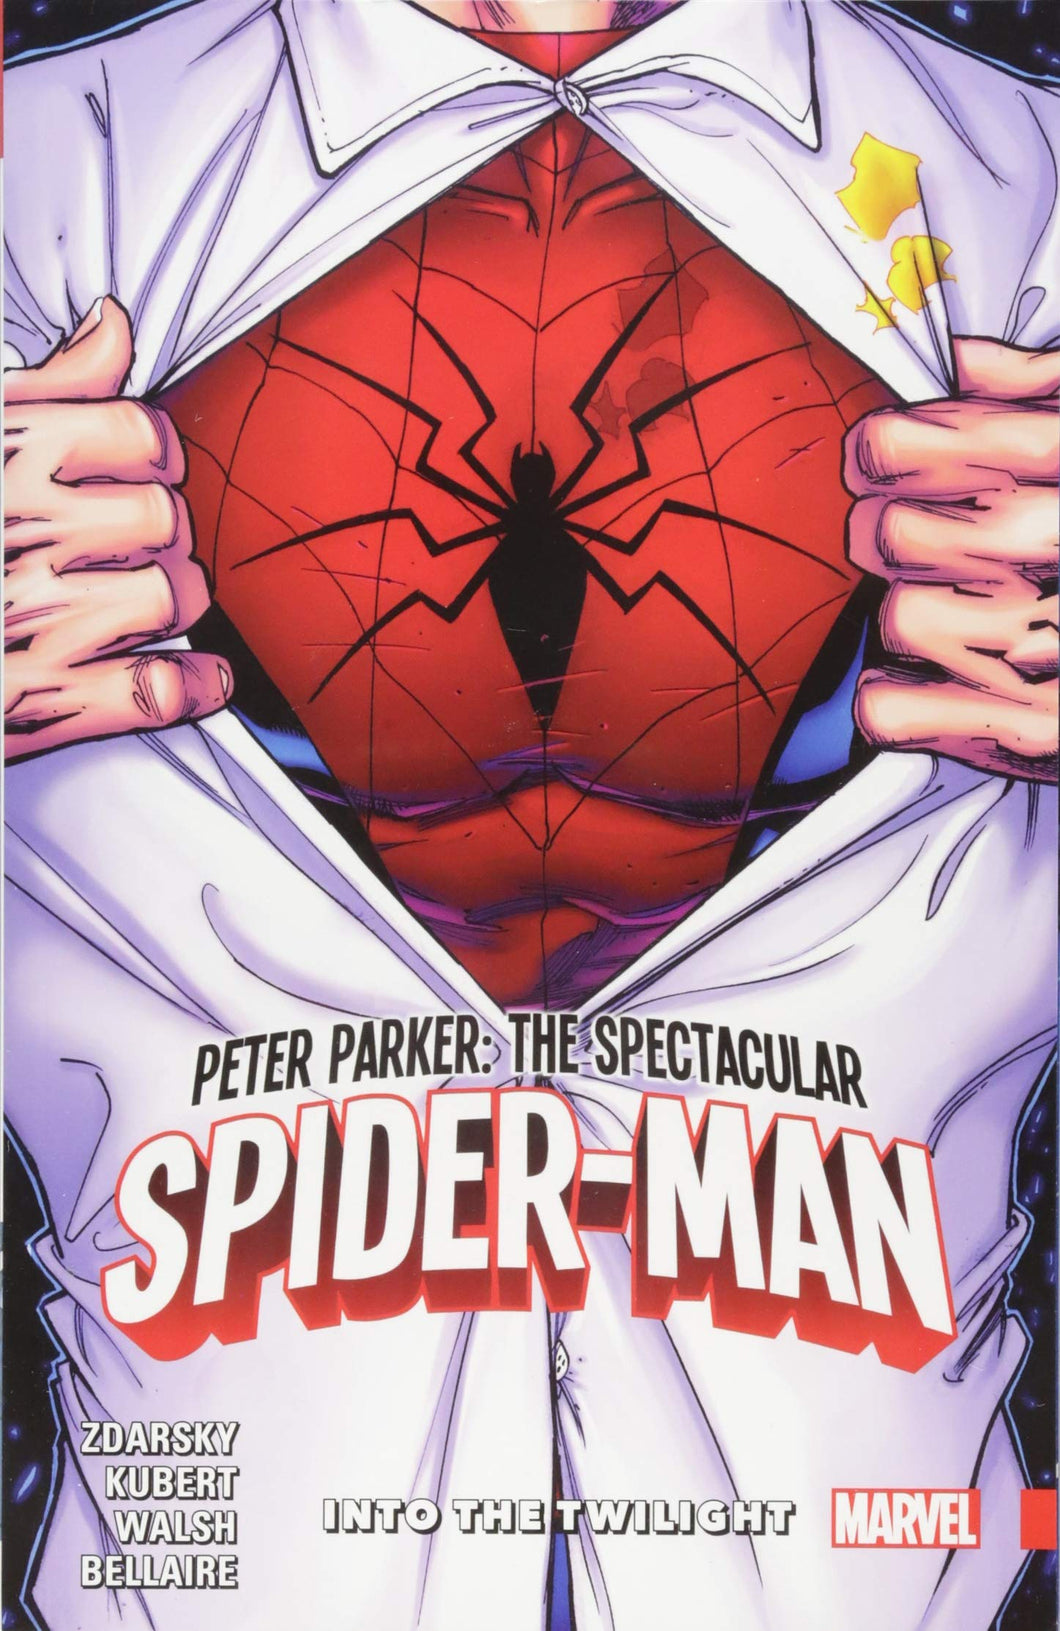 Peter Parker : The Spectacular Spider-Man Vol. 1 : Into the Twilight